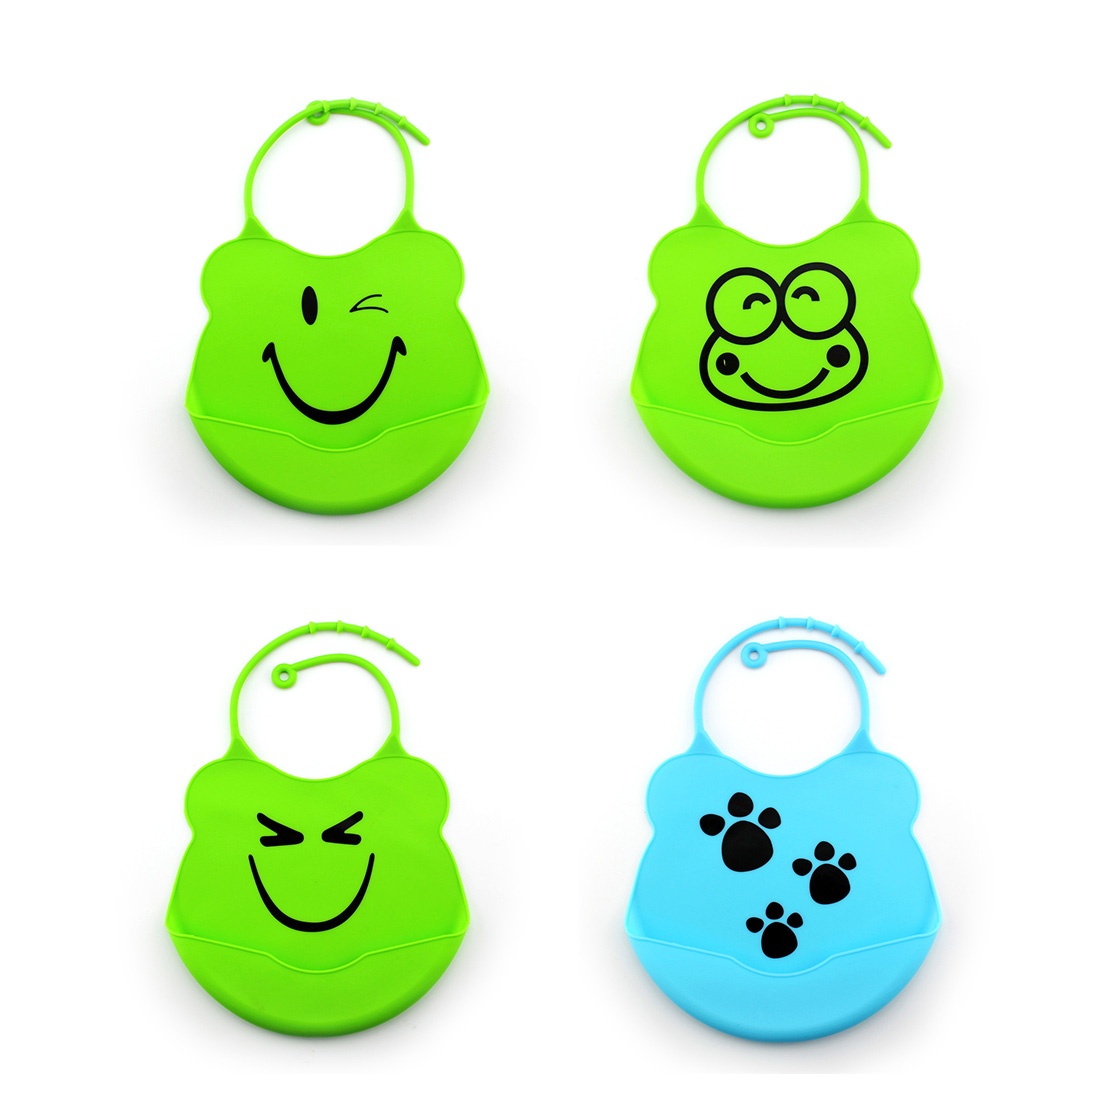 Cute customized OEM silicone bib healthier and safer